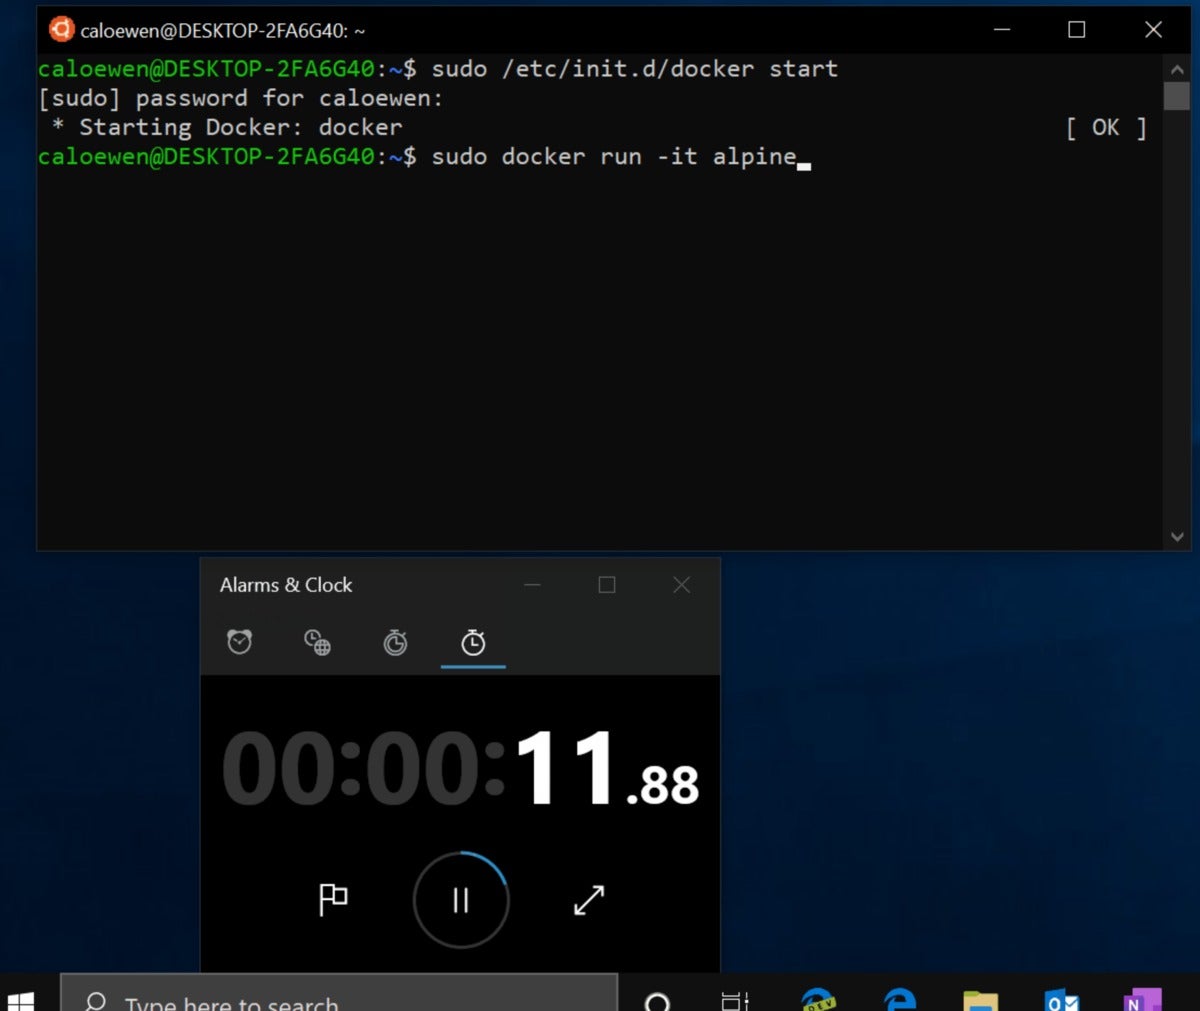 microsoft windows 10 20h1 windows subsystem for linux 2 wsl2